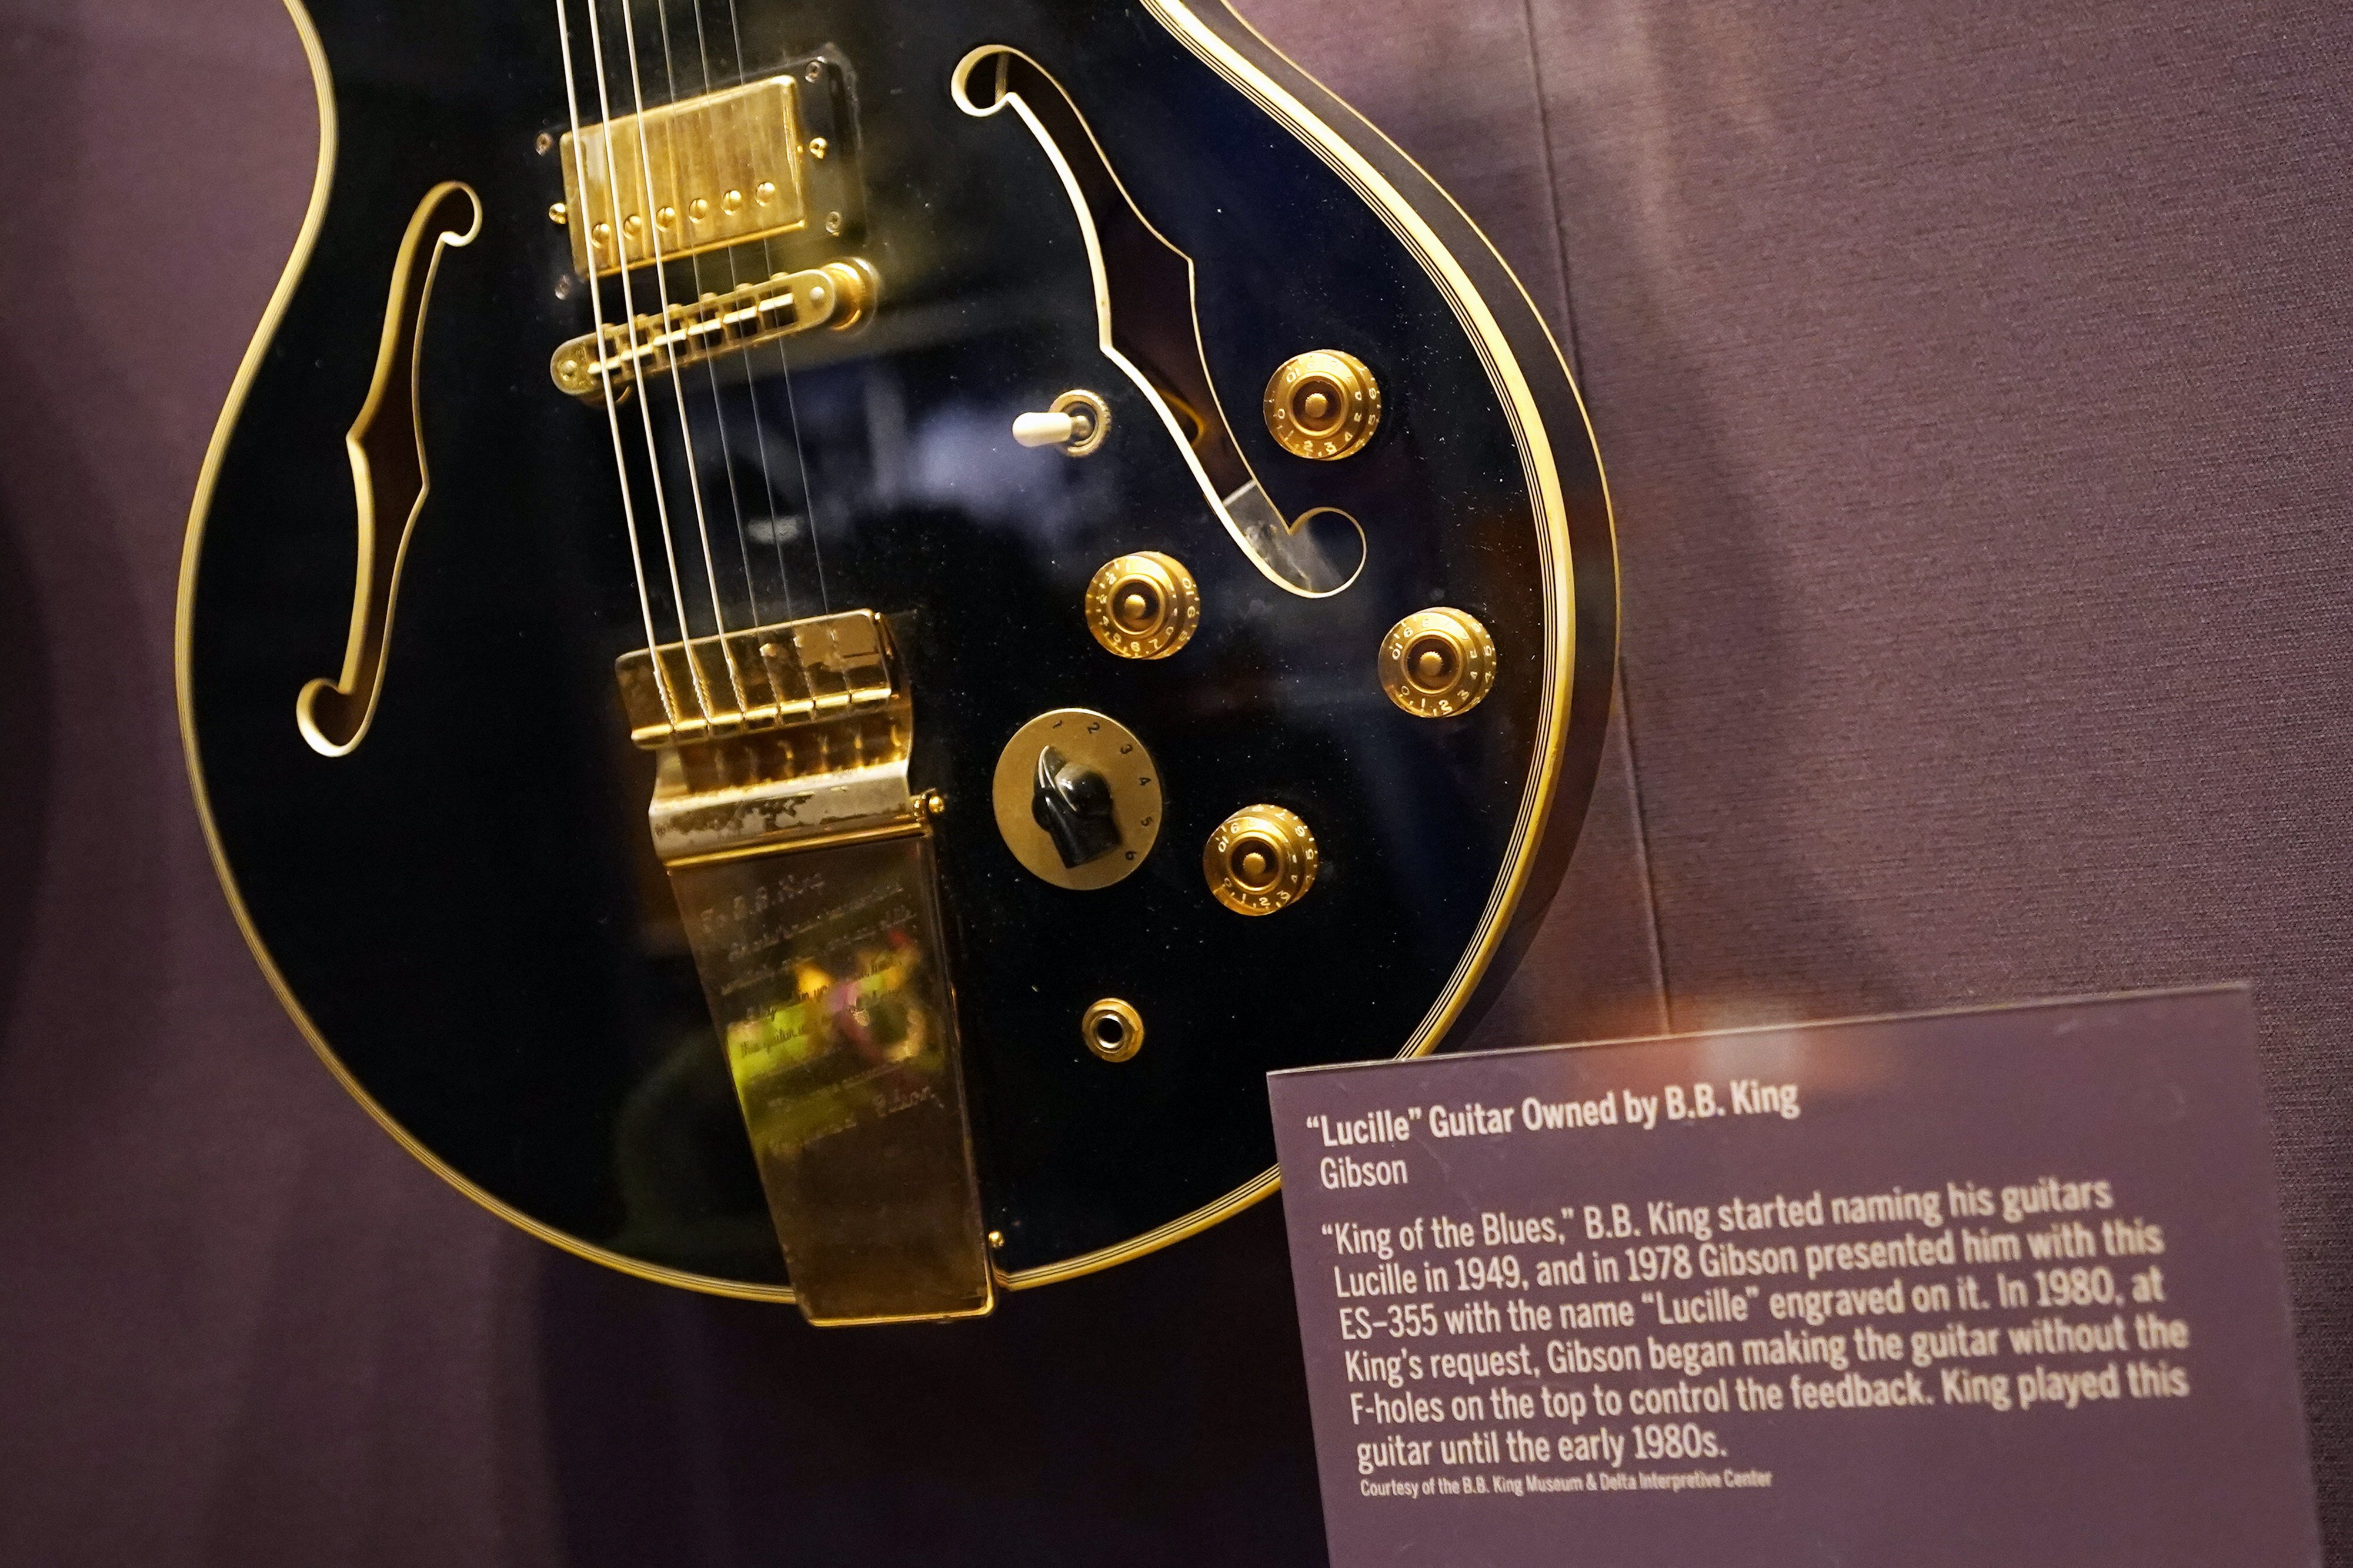 Lucille, a guitar owned by blues legend BB King, is displayed at the National Museum of African American Music. Photo: AP